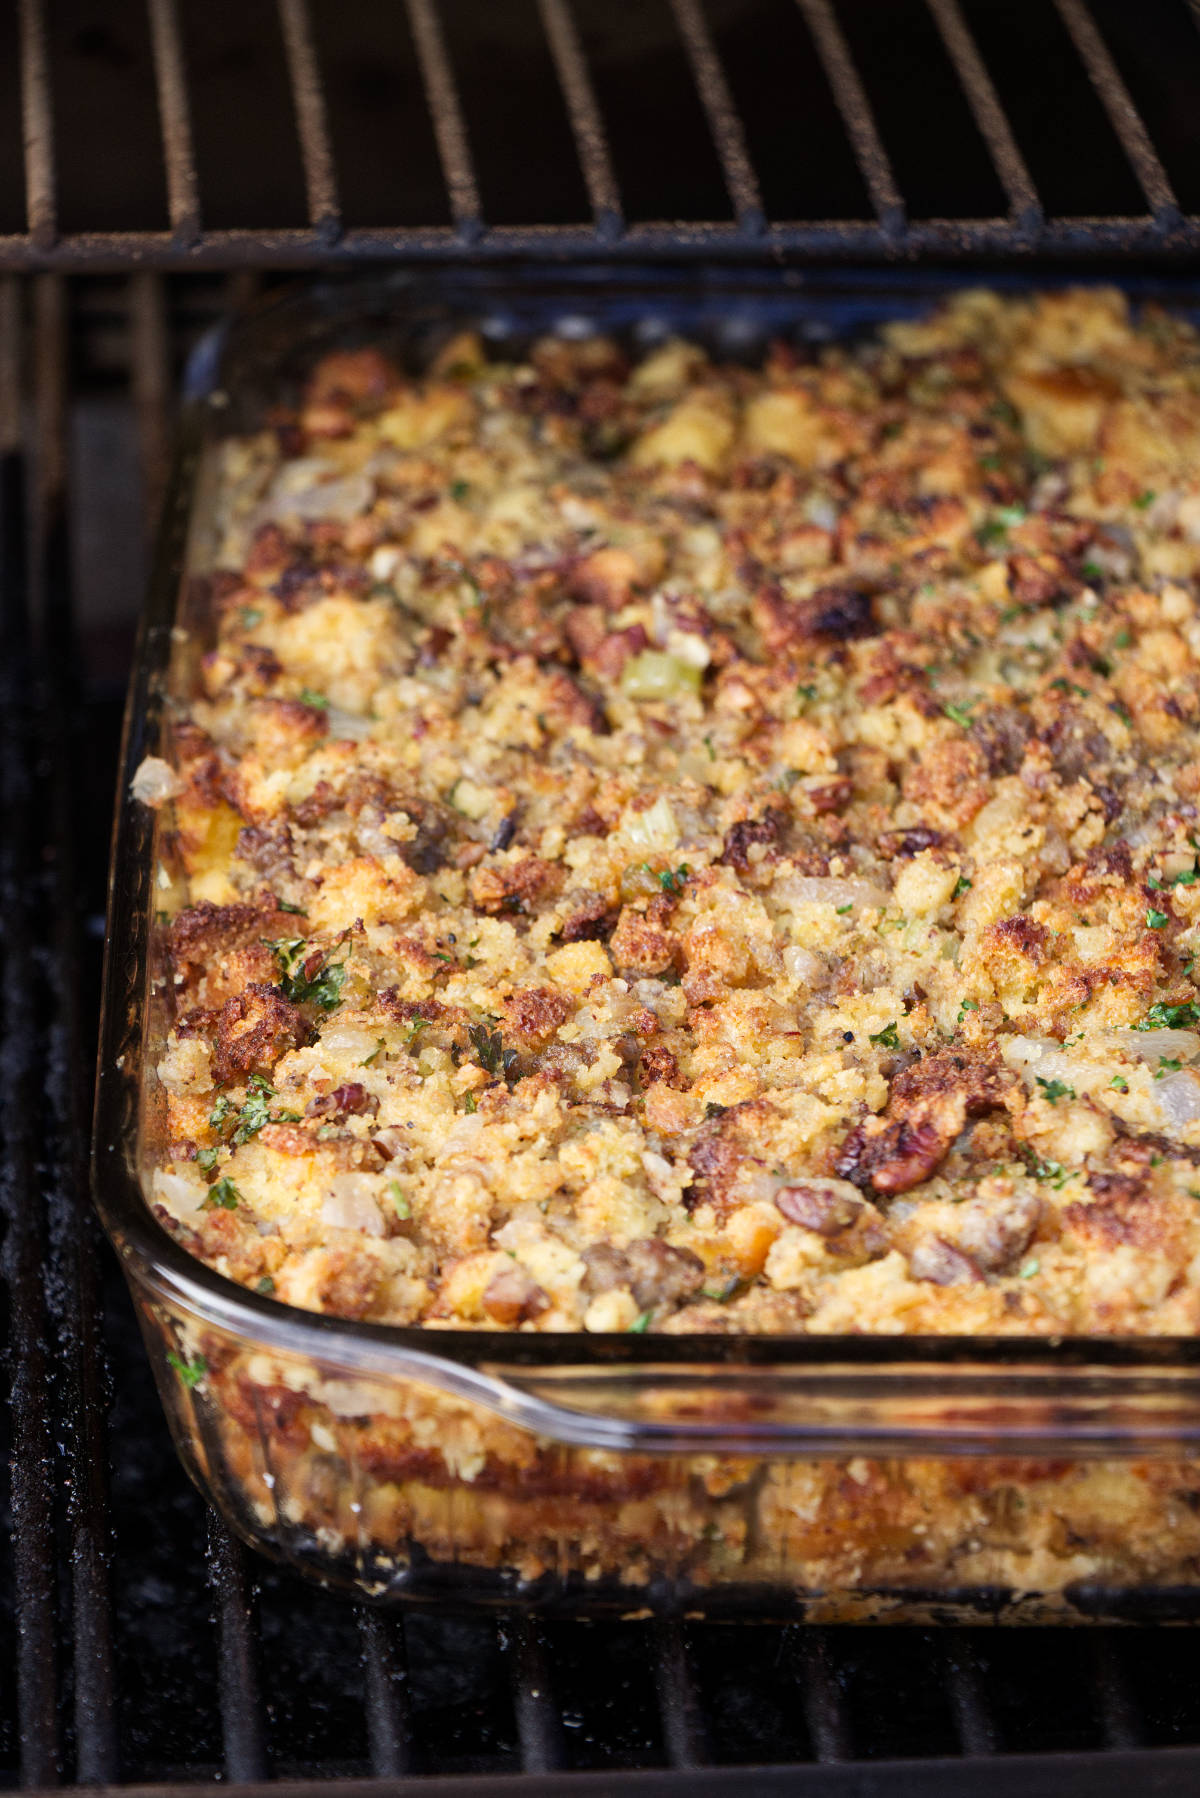 A casserole dish with stuffing in a Traeger grill.